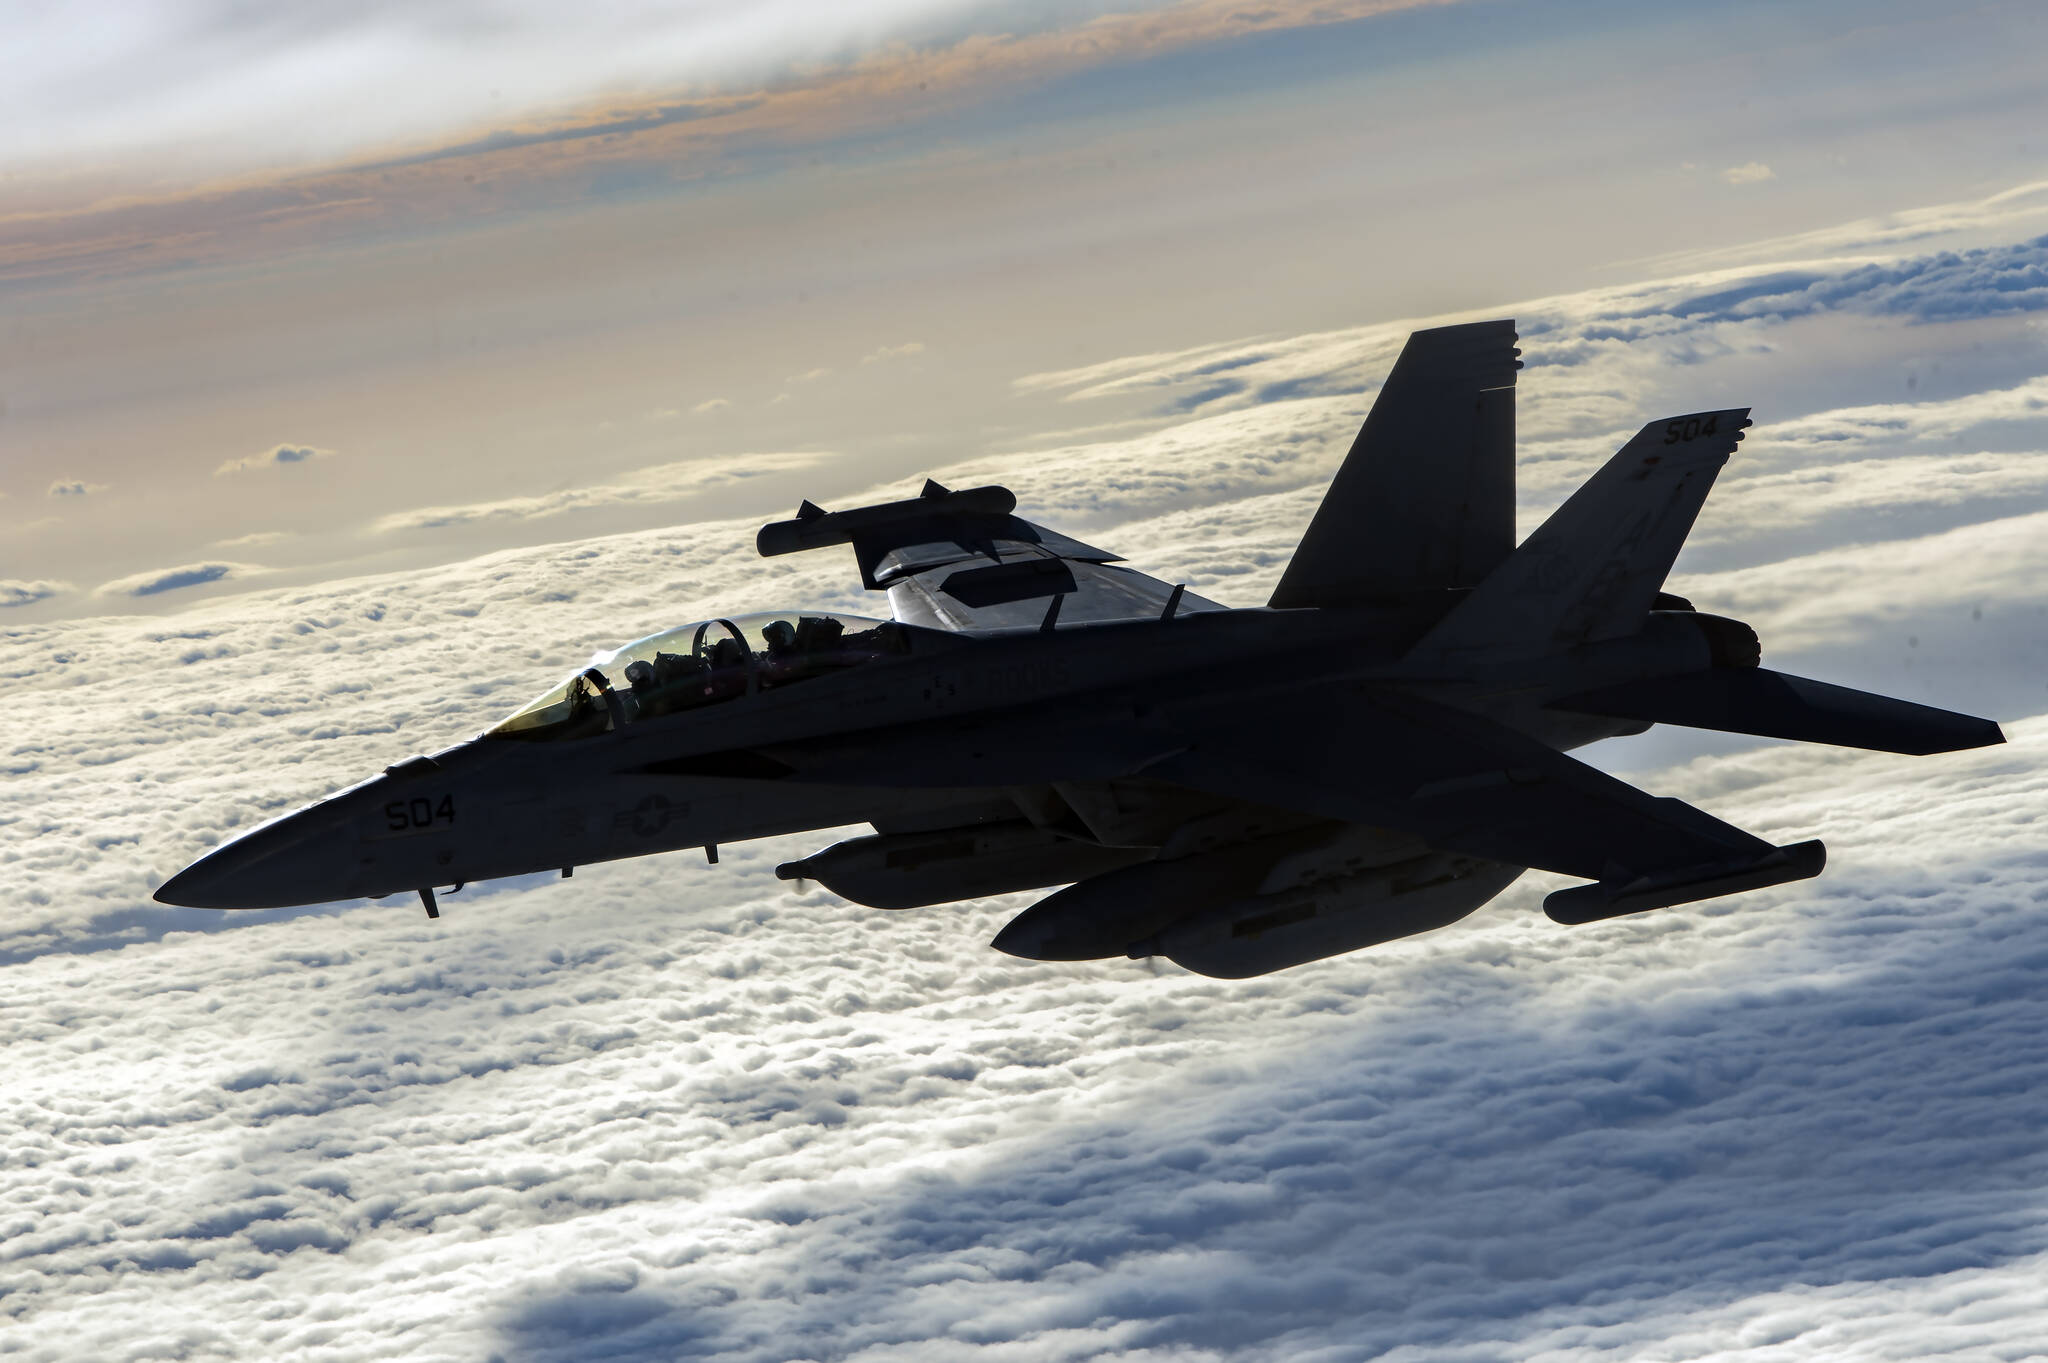 A U.S. Navy EA-18G Growler flies over Afghanistan, Jan. 23, 2020. The EA-18G has the capabilities to perform a wide range of enemy defense suppression missions with the latest electronic attack technology, jamming pods, and satellite communications. (U.S. Air Force photo by Staff Sgt. Matthew Lotz)